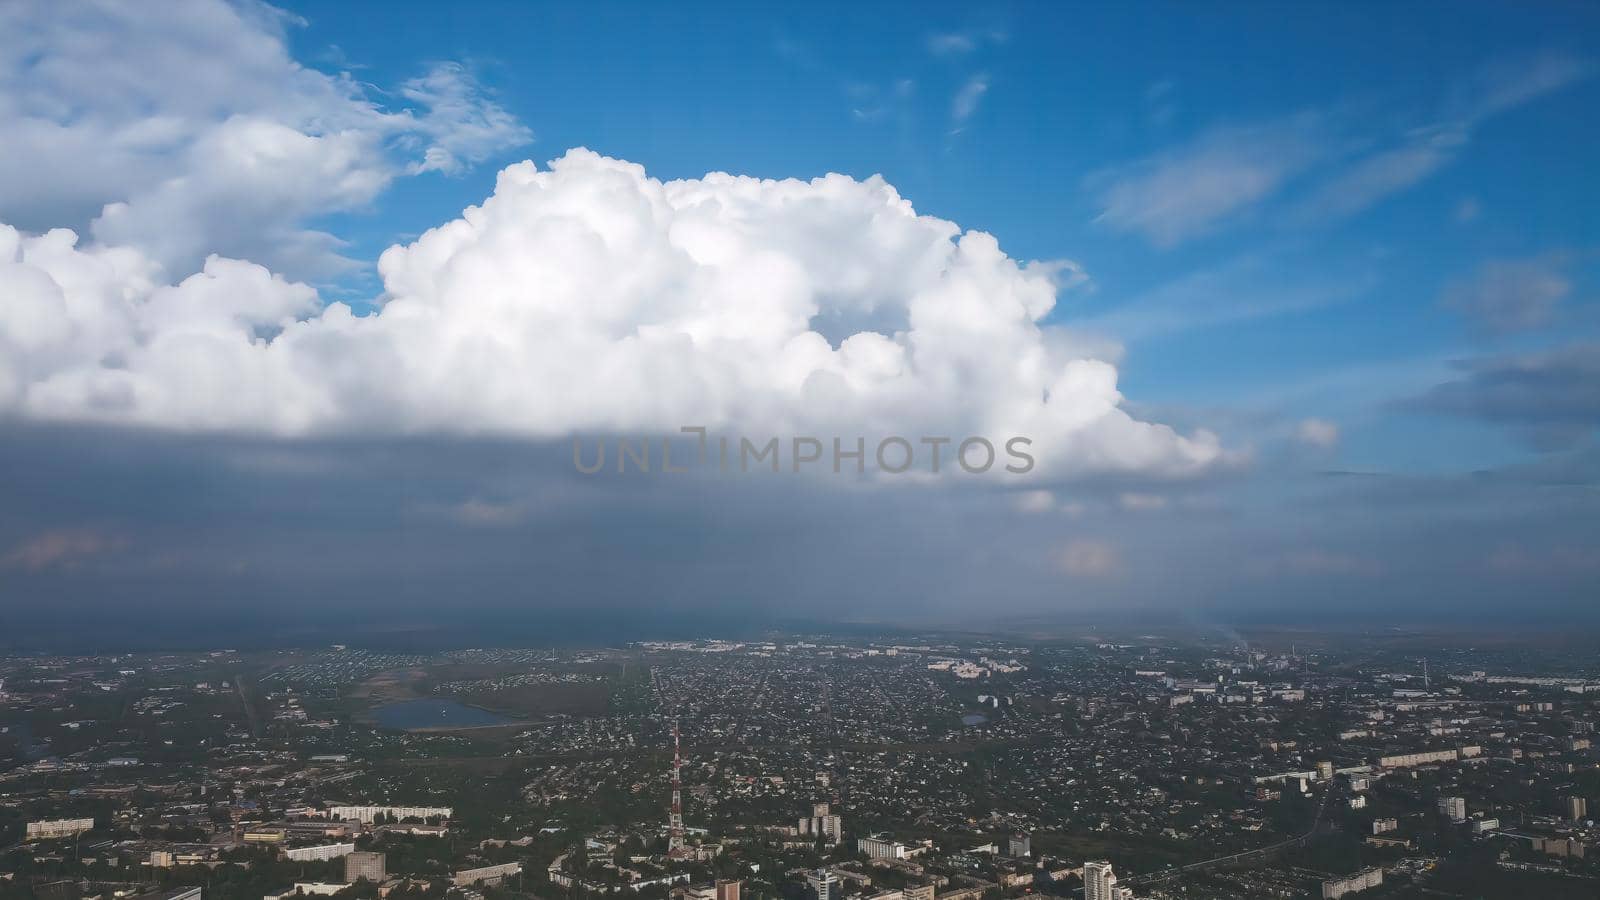 Big clouds over the City. sky with a stormy clouds just before storm - nature photography. The rain is coming by igor010